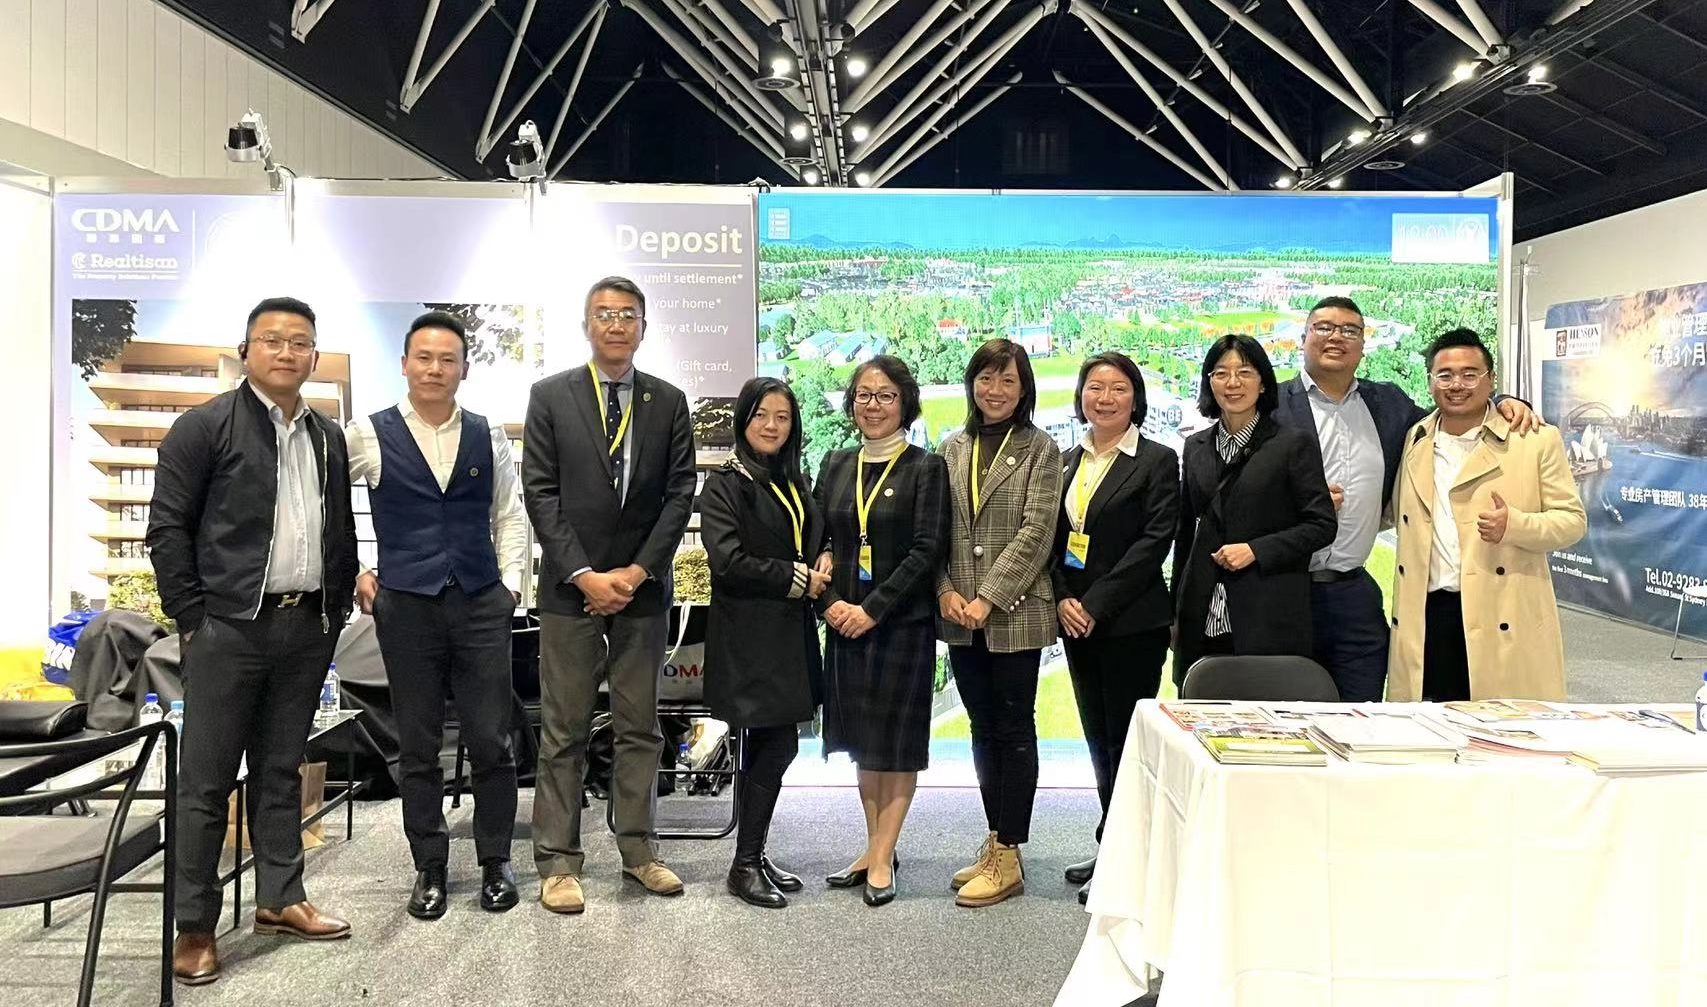 Realtisan team participated in the two-day Sydney Property Expo at ICC SYD